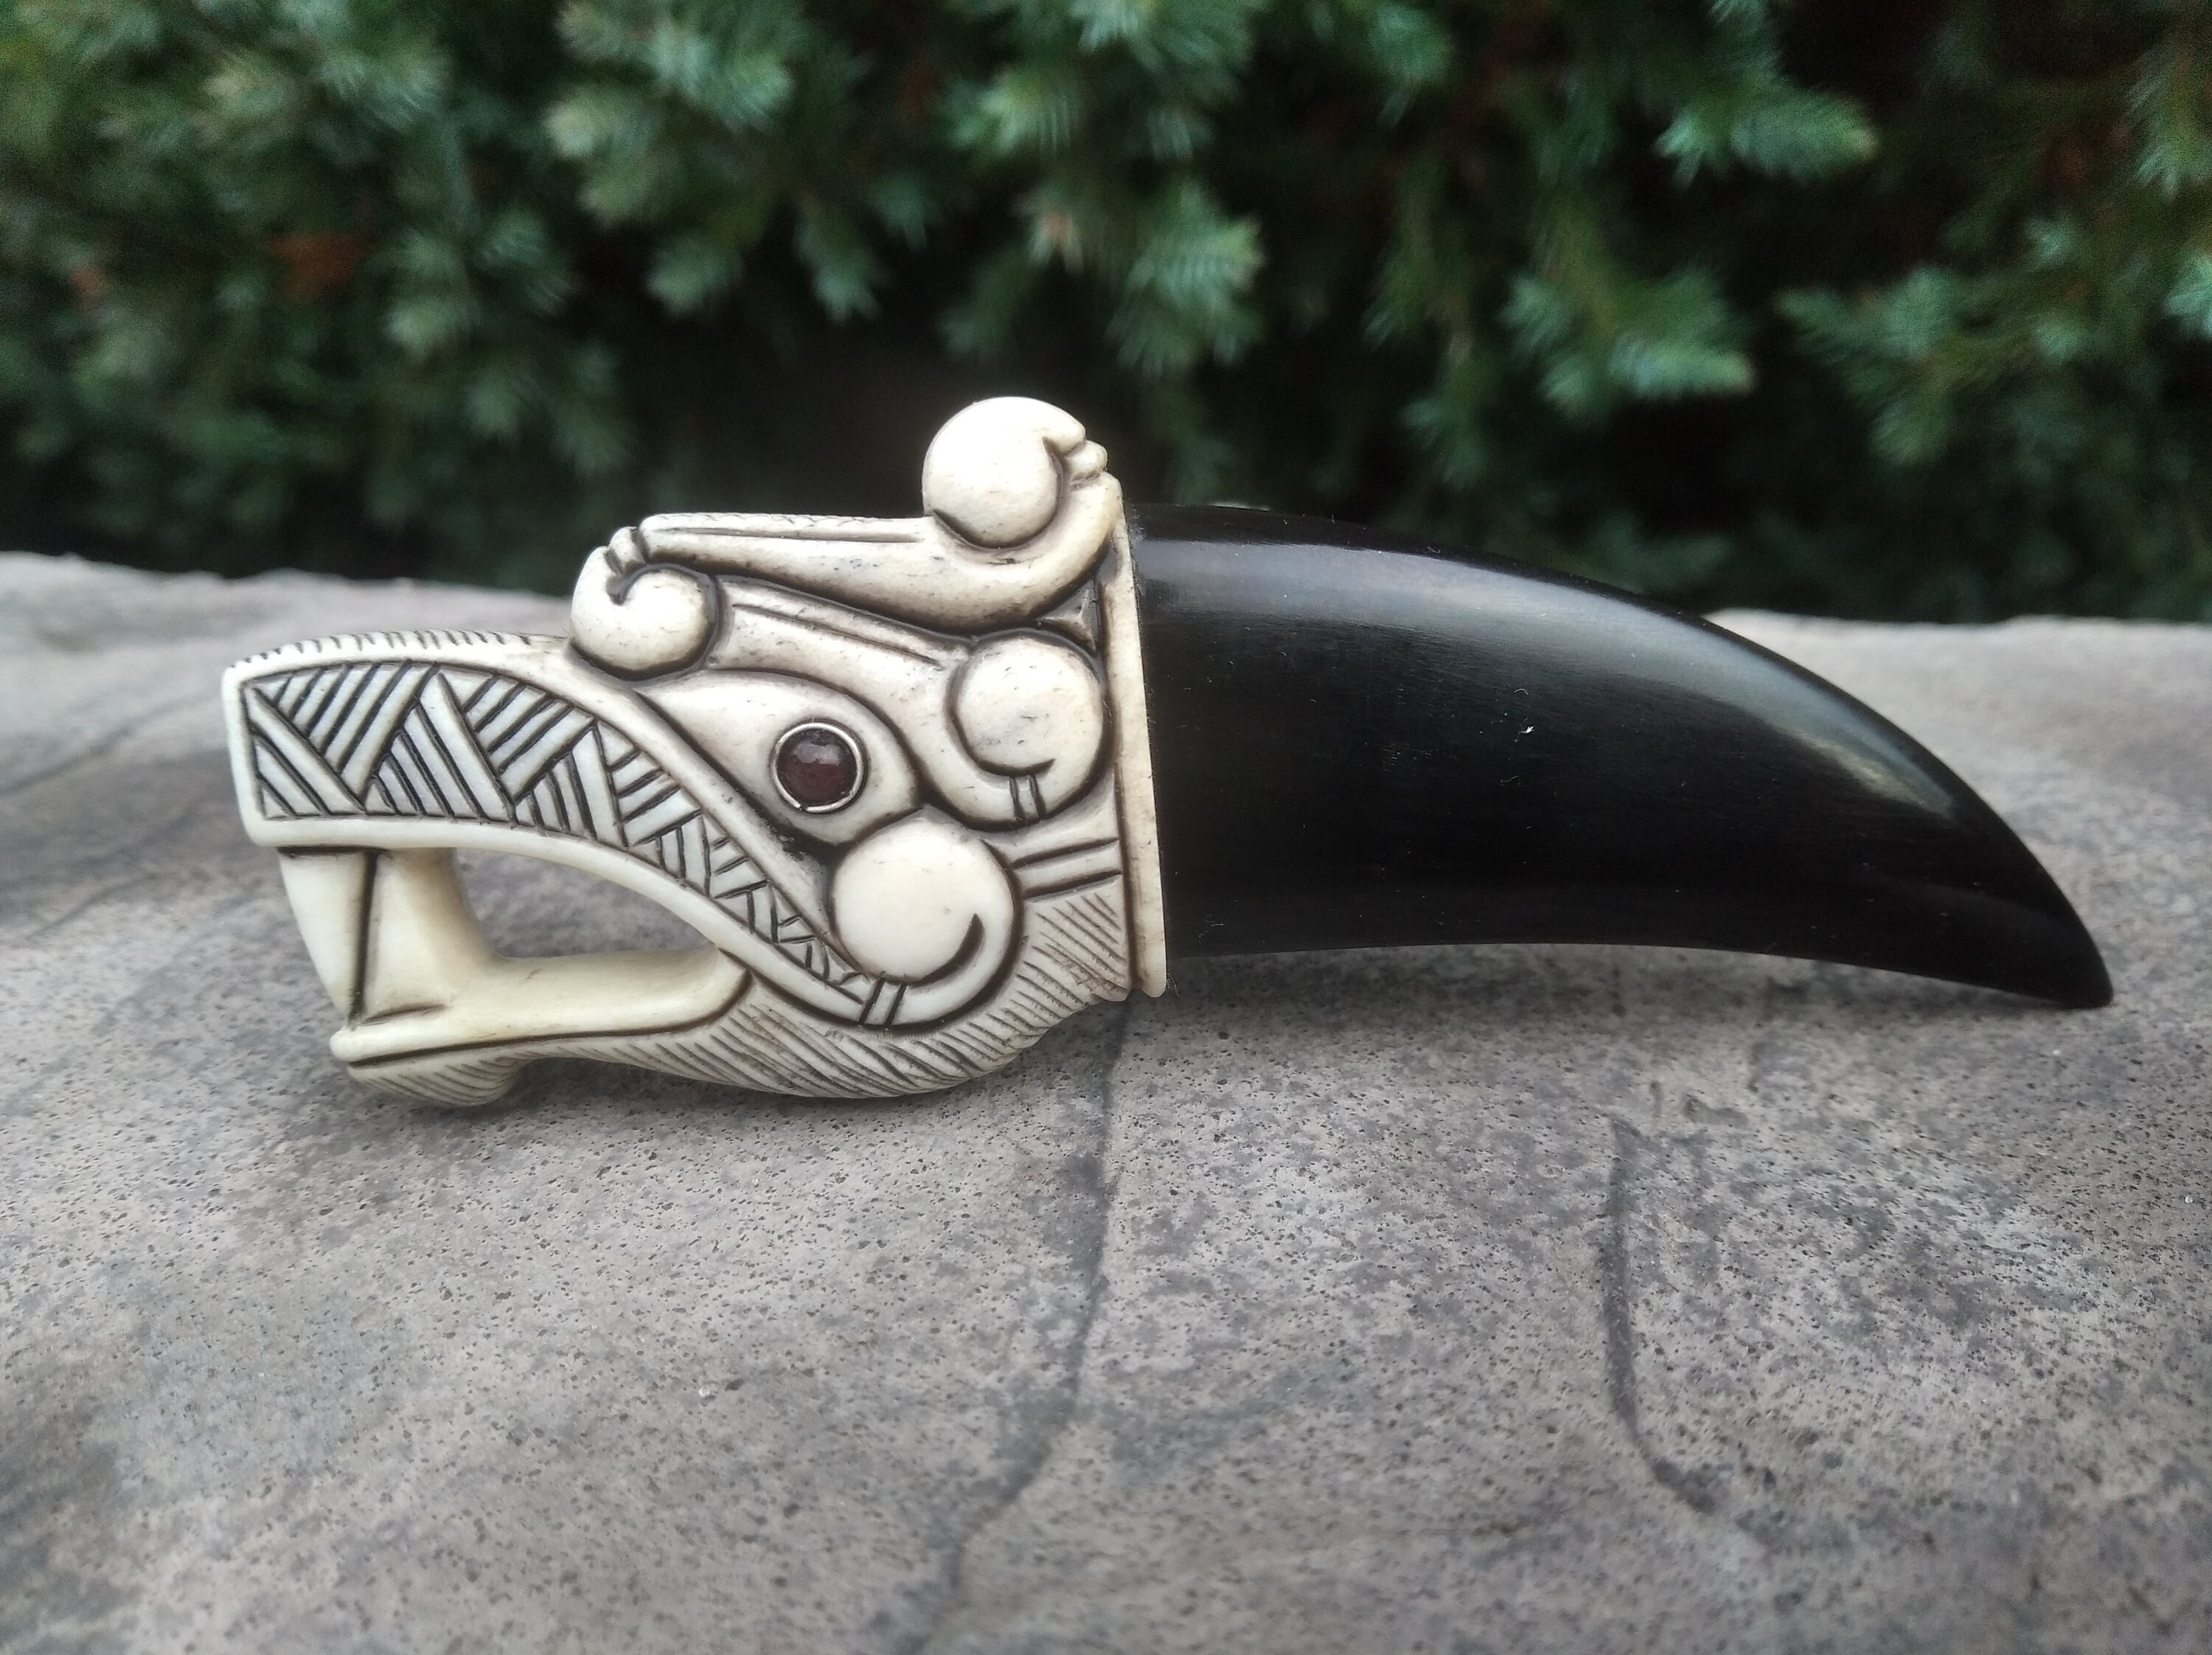 Nordic Style Dragon claw Pendant Celtic Hand Carved Viking Bear / Wolf claw necklace Pagan Viking Warrior amulet Berserk runic talisman